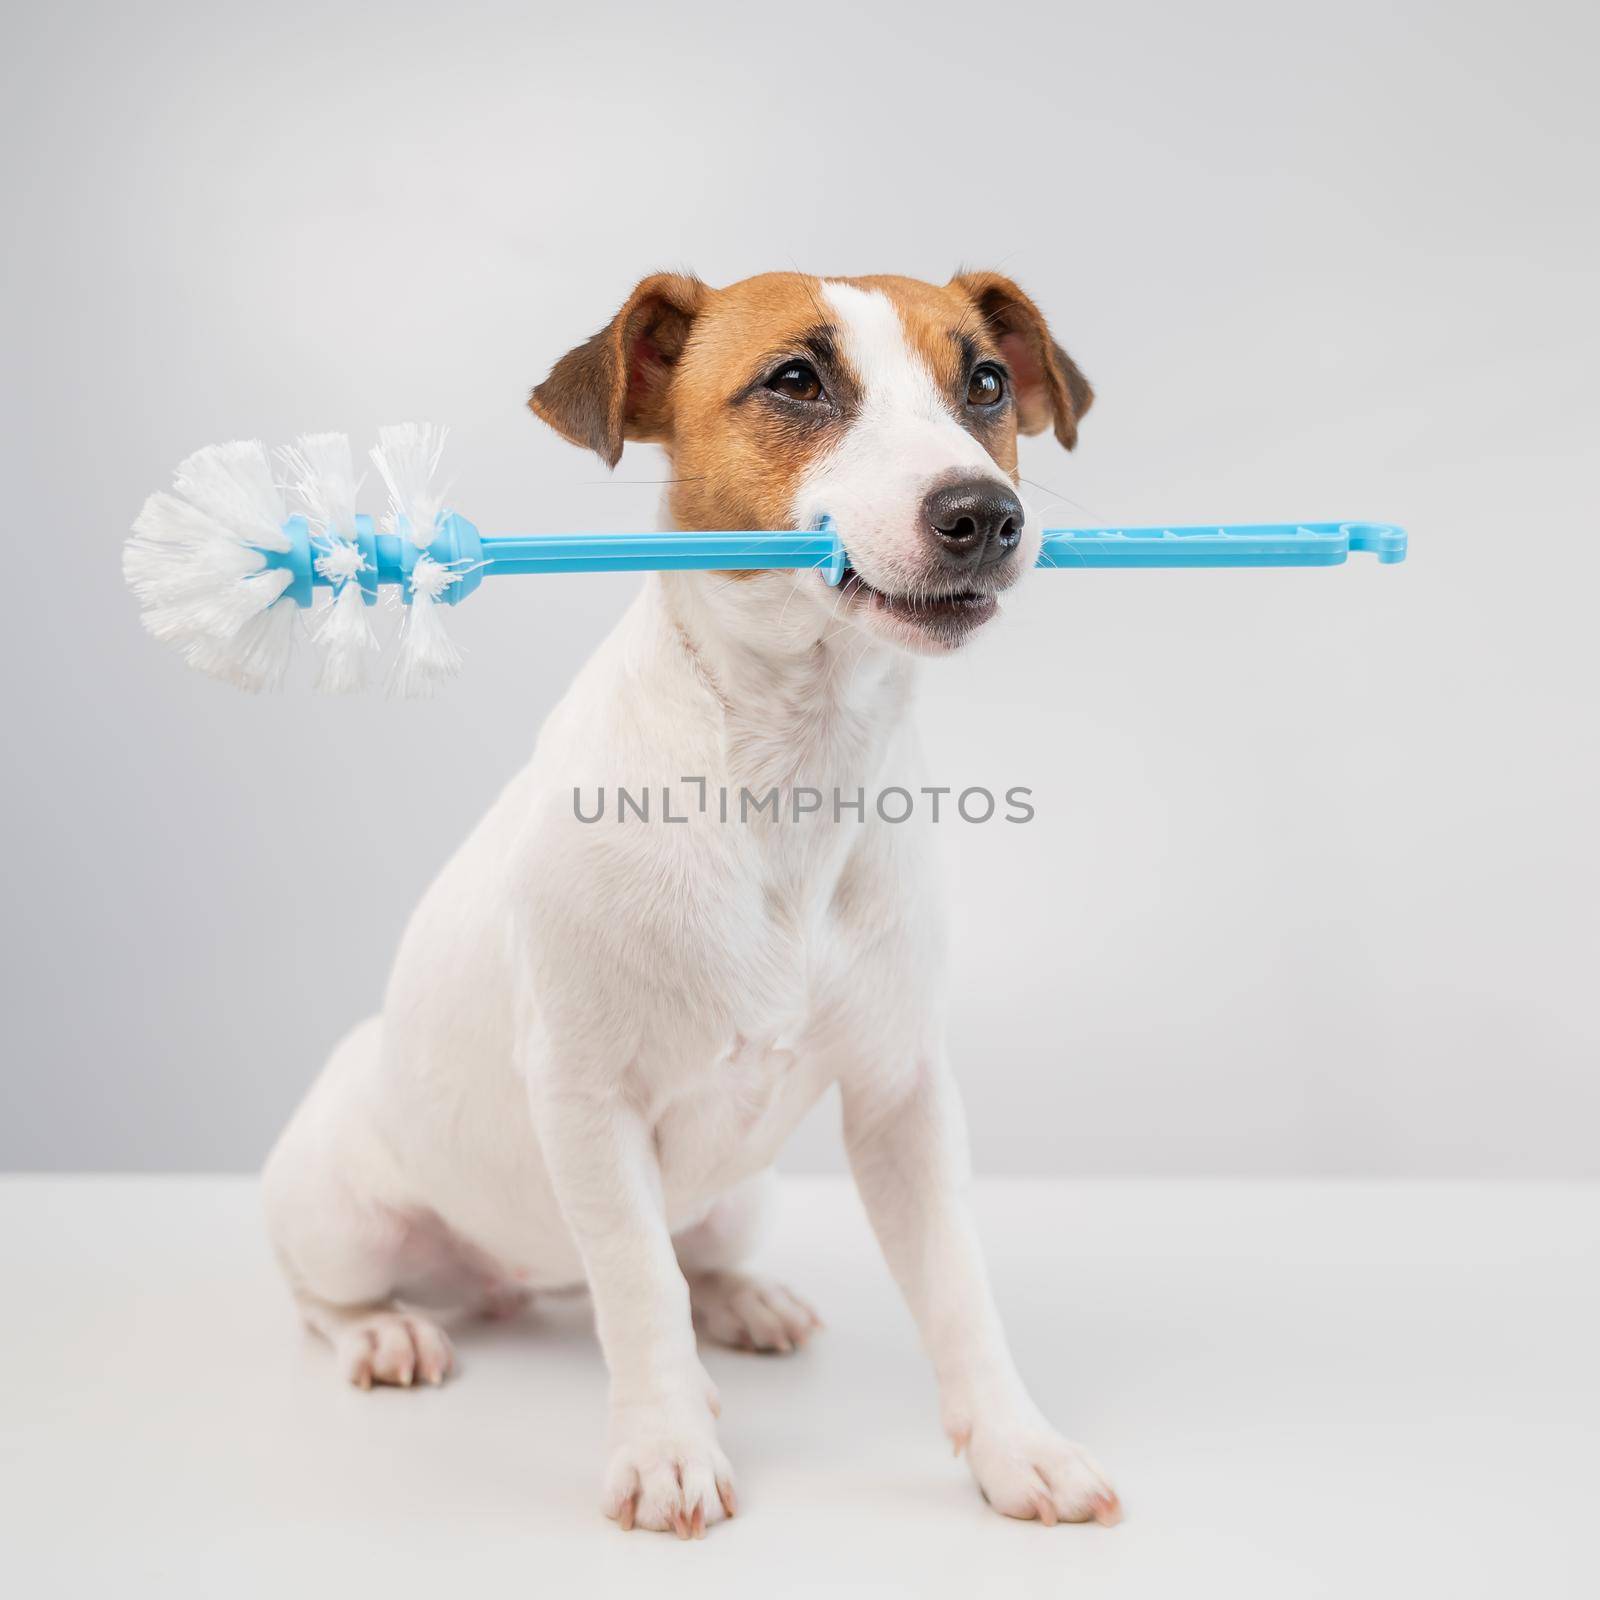 Jack russell terrier dog holds a blue toilet brush in his mouth. Plumbing cleaner by mrwed54